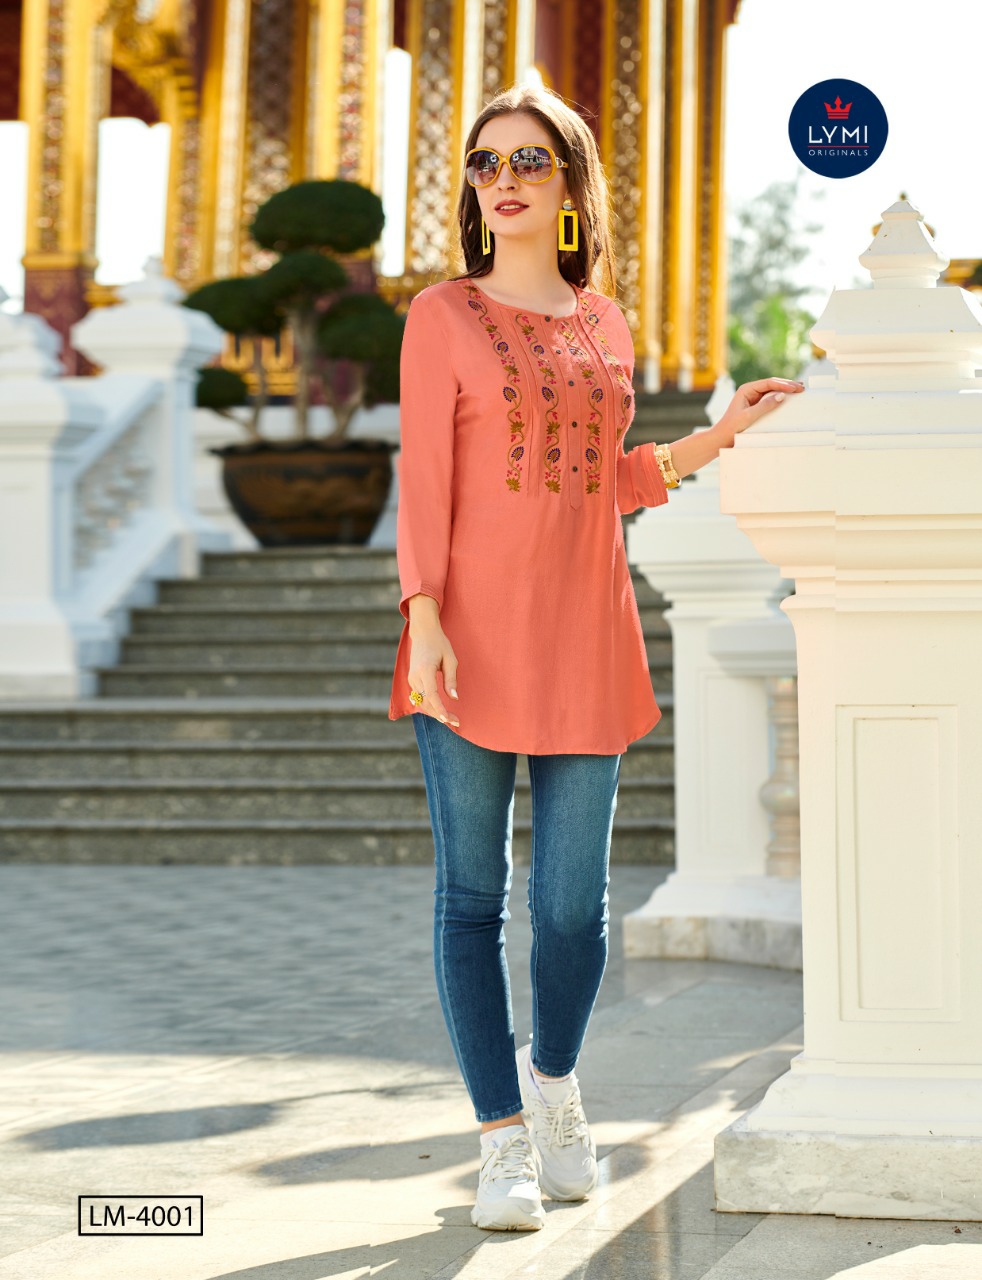 Lymi Presents Canon Viscose With Embroidery Work Short Tops Kurtis Collection